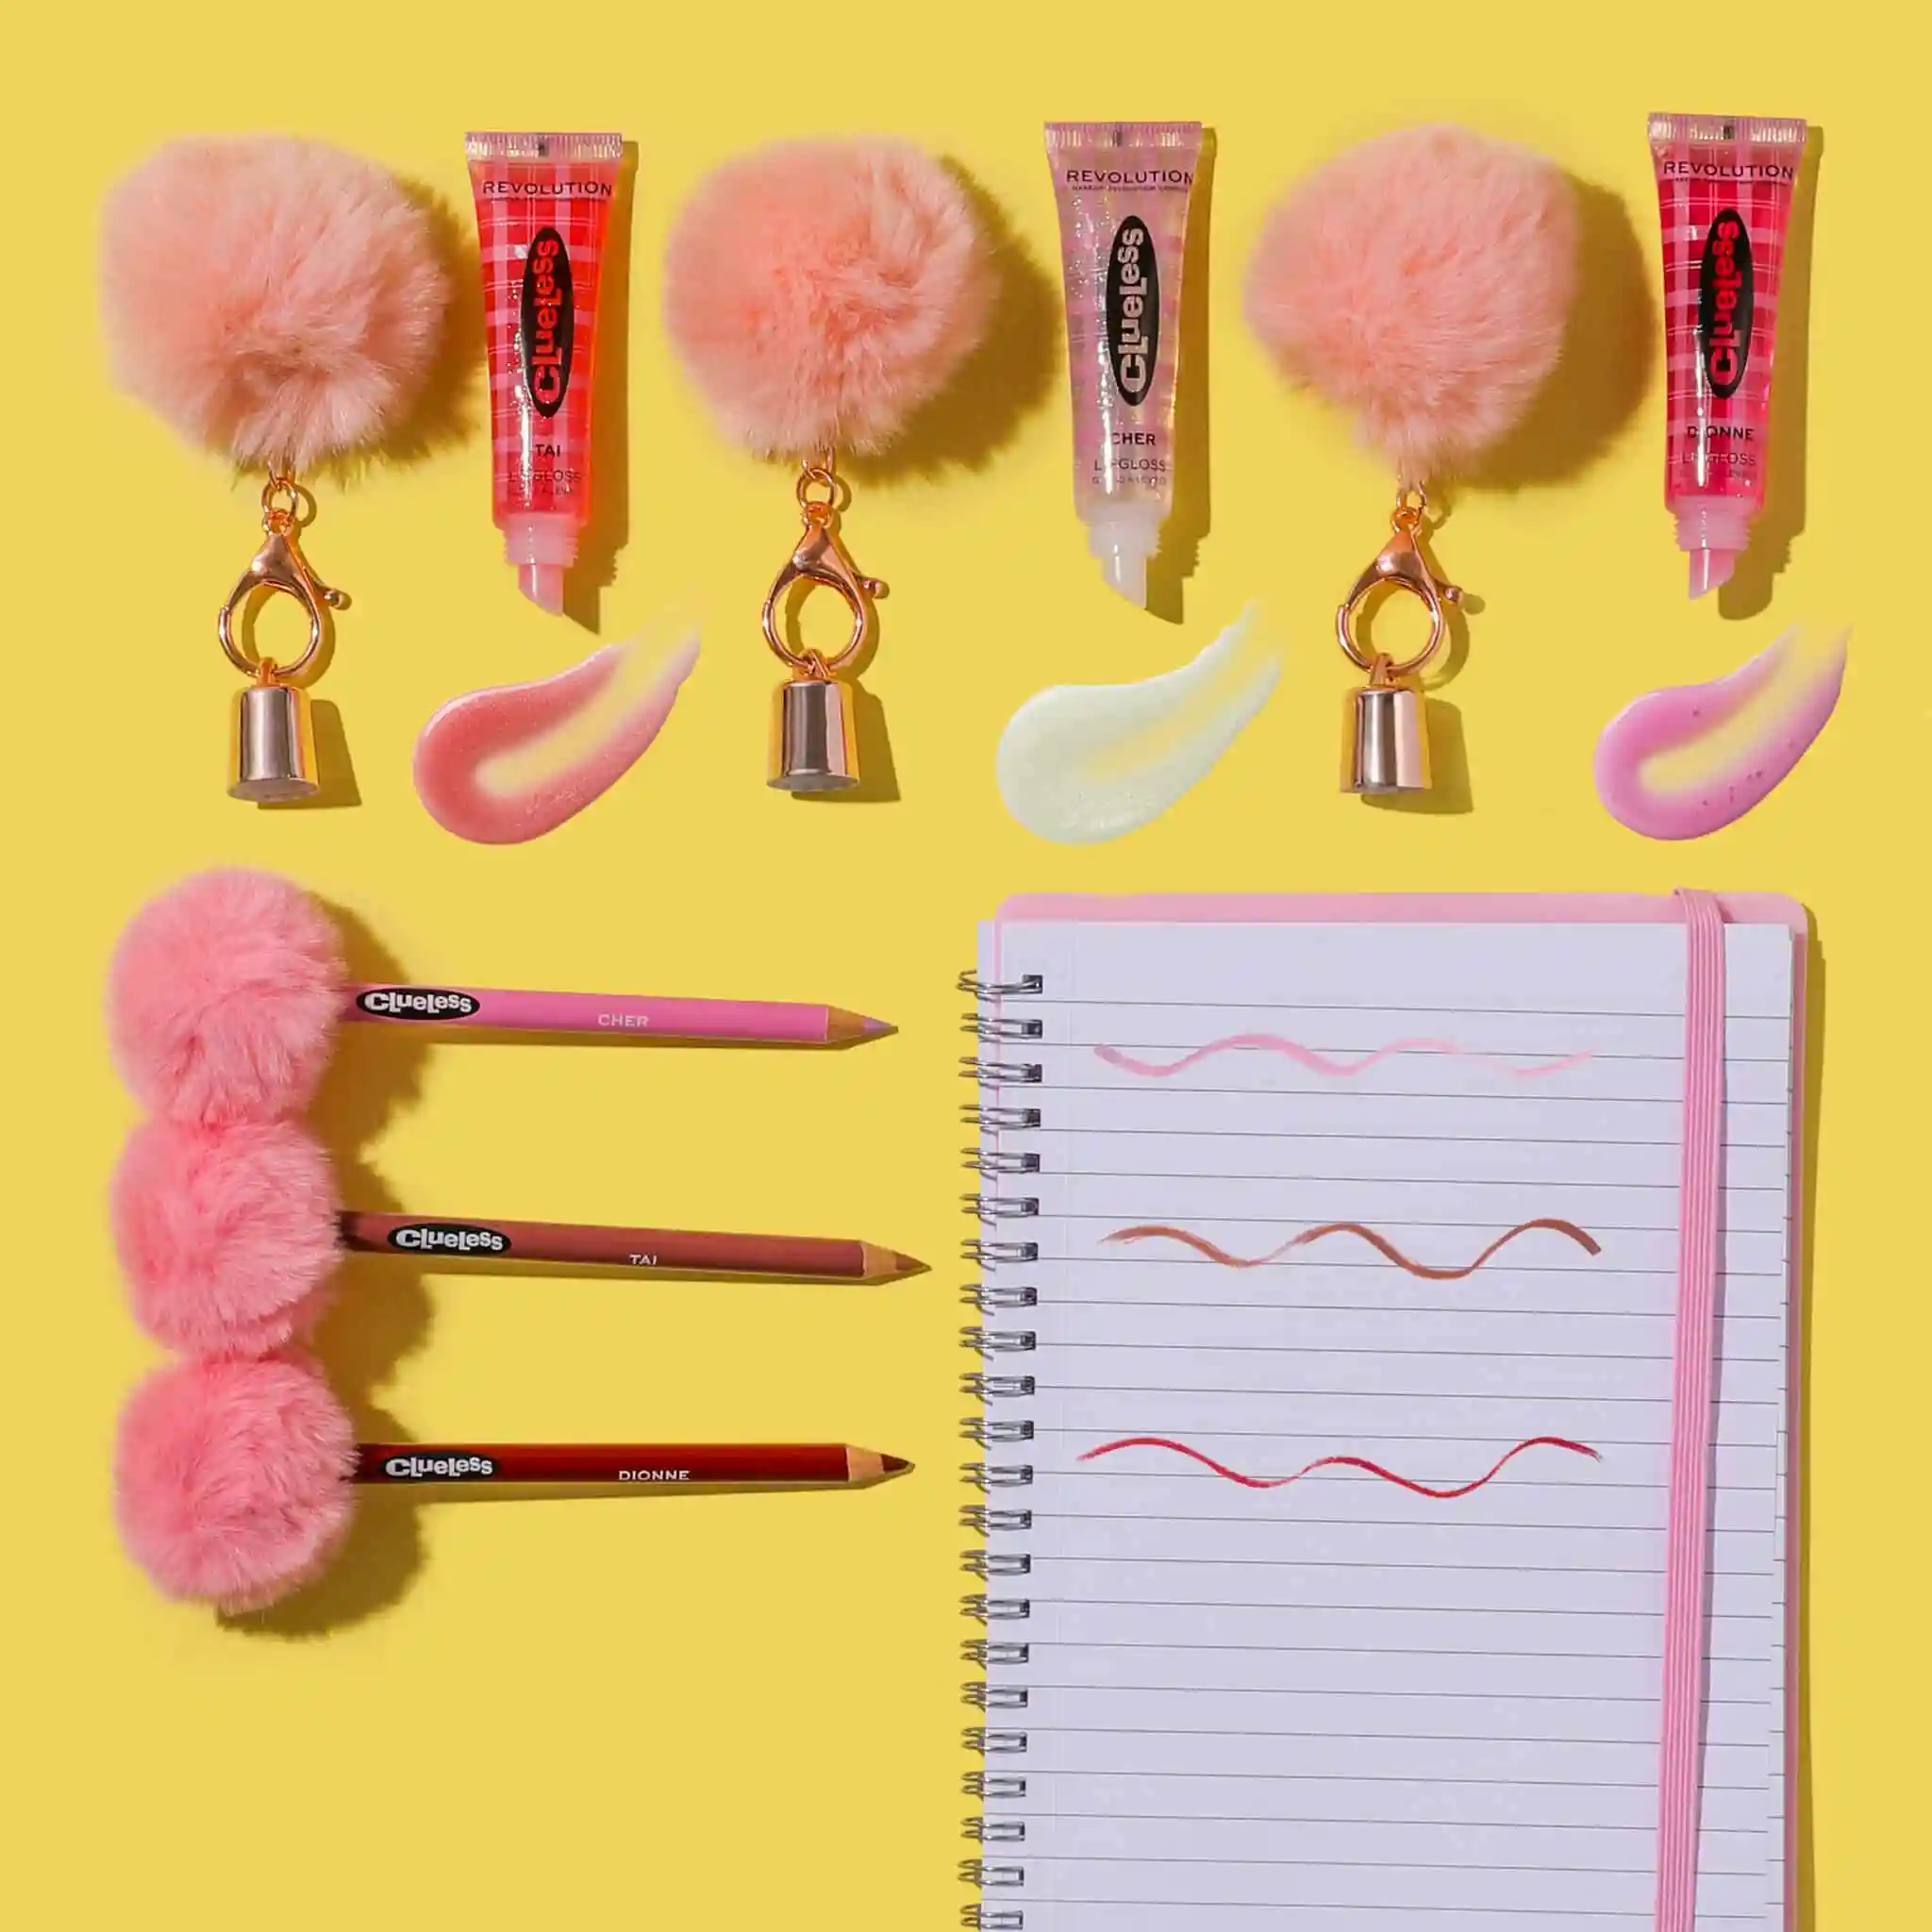 As IF! A Clueless inspired makeup collection has dropped